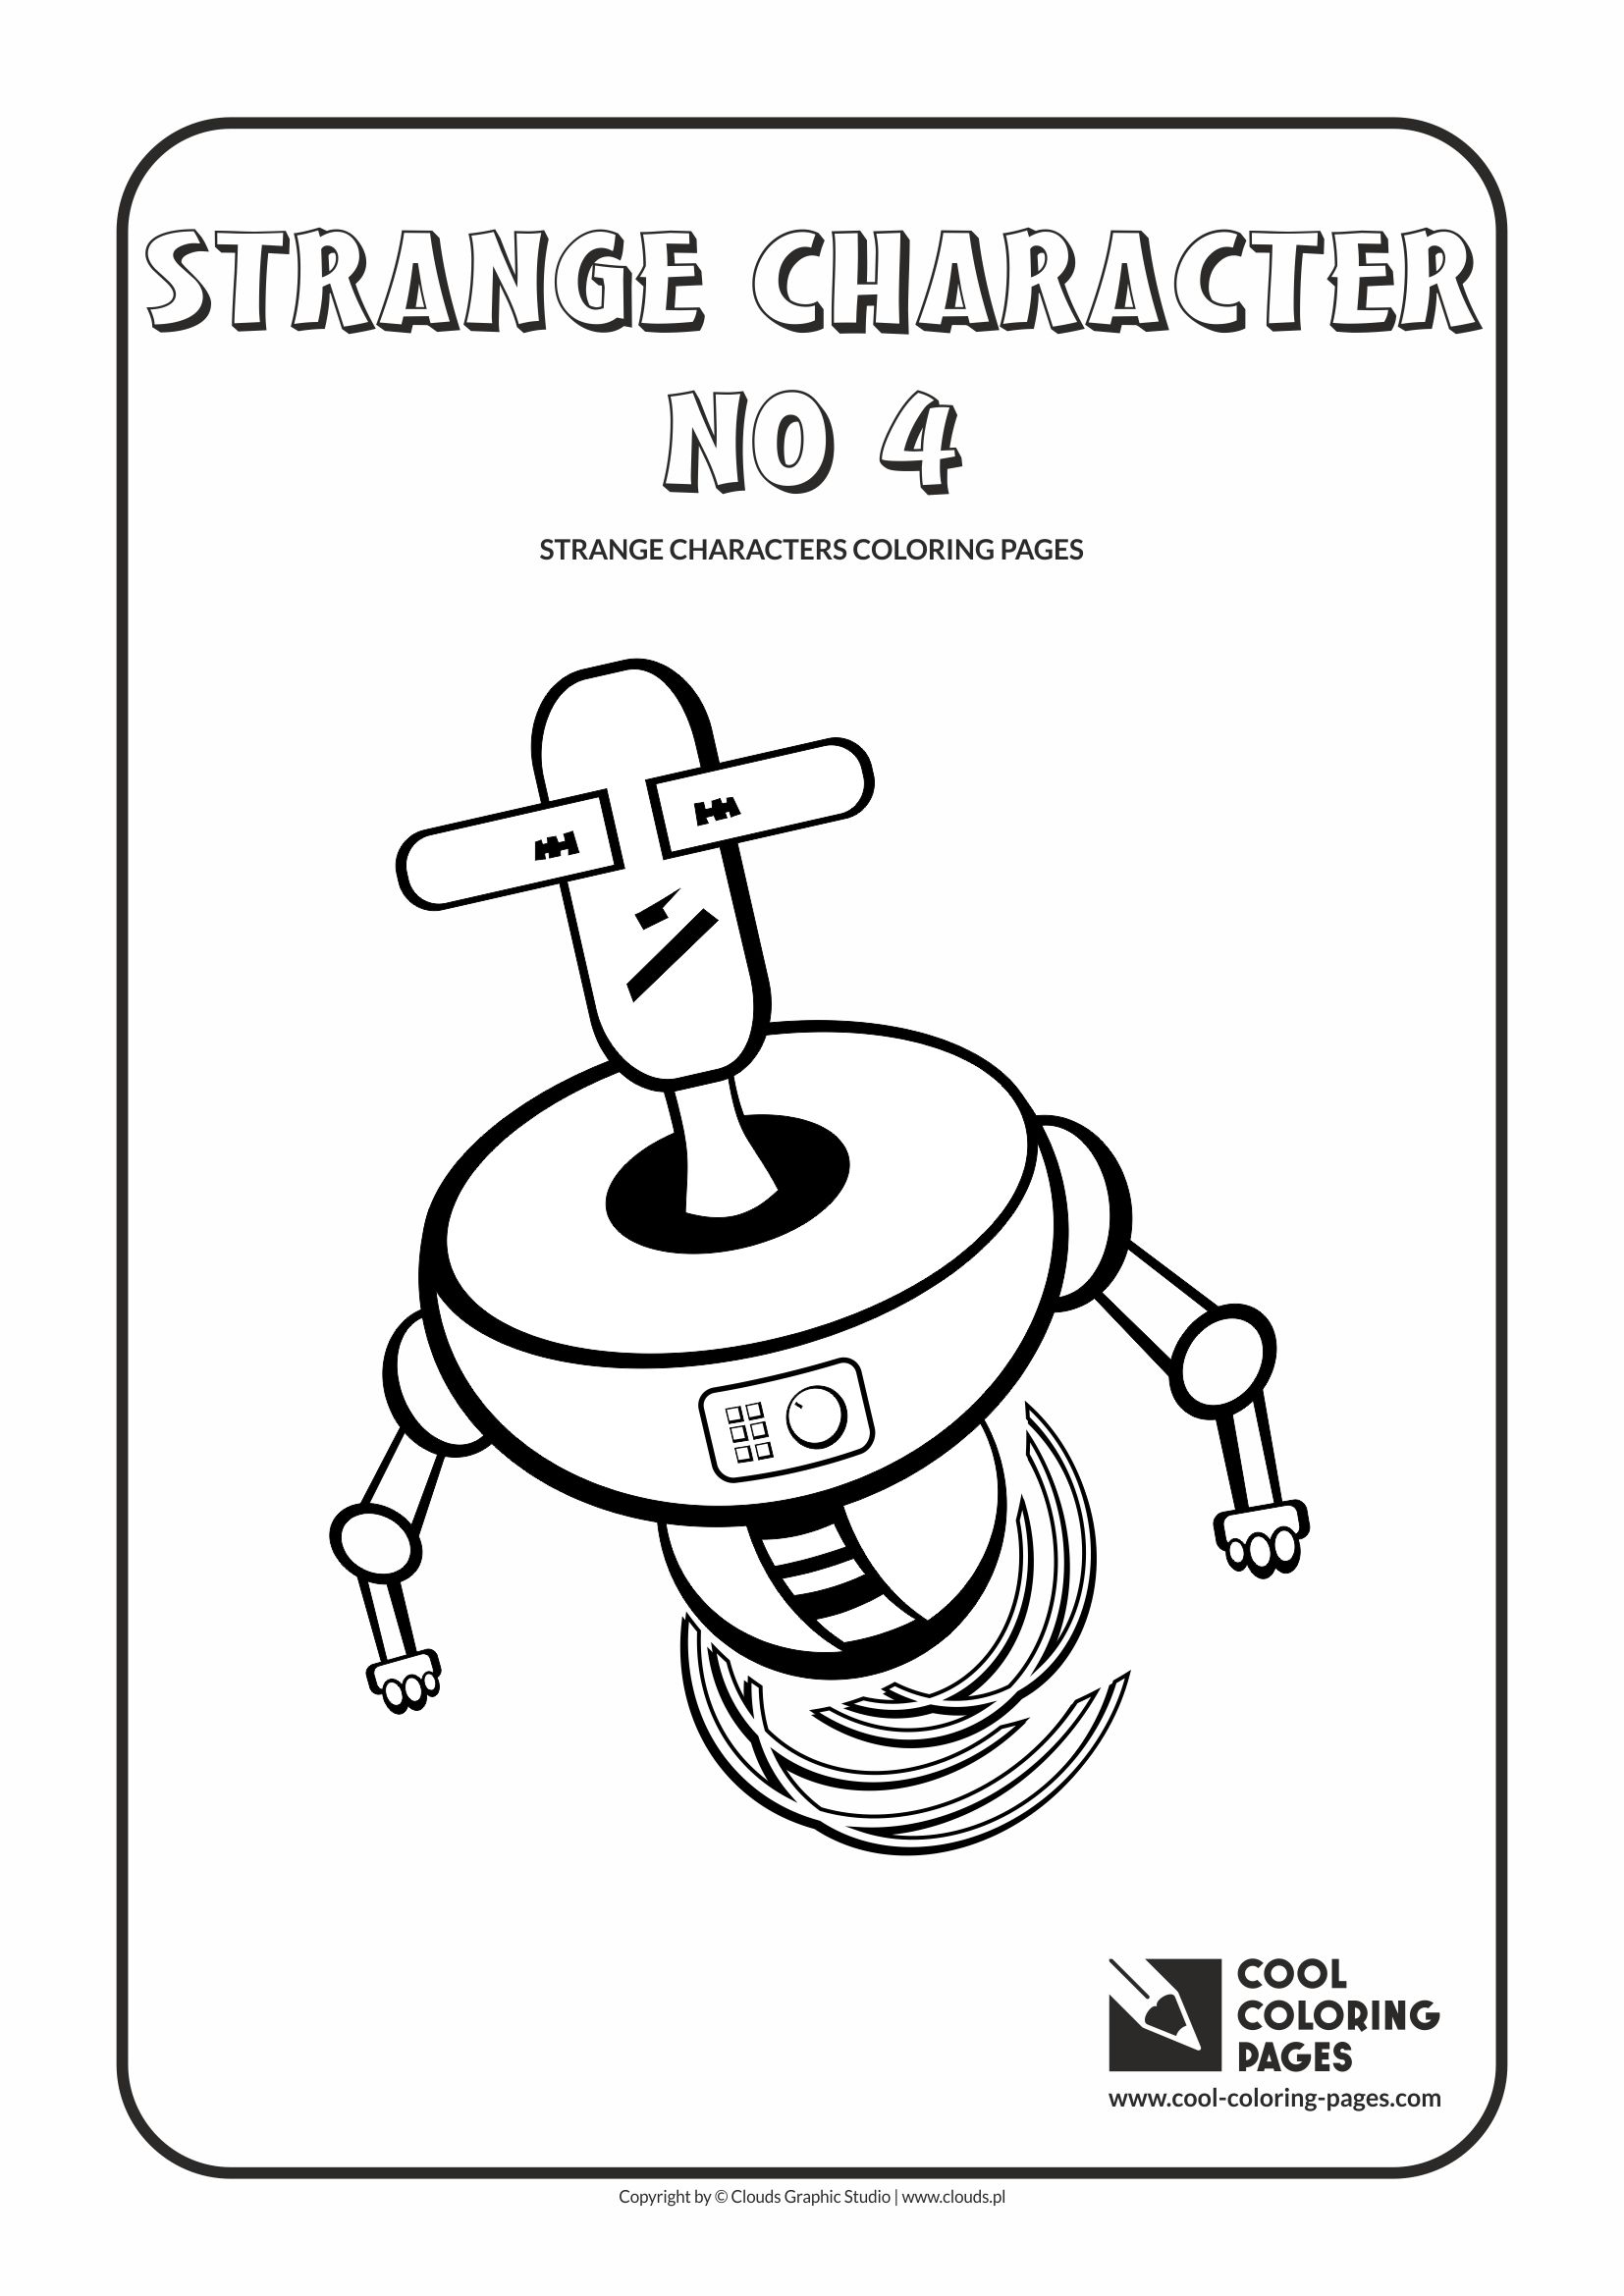 Cool Coloring Pages - Others / Strange character no 4 / Coloring page with strange character no 4